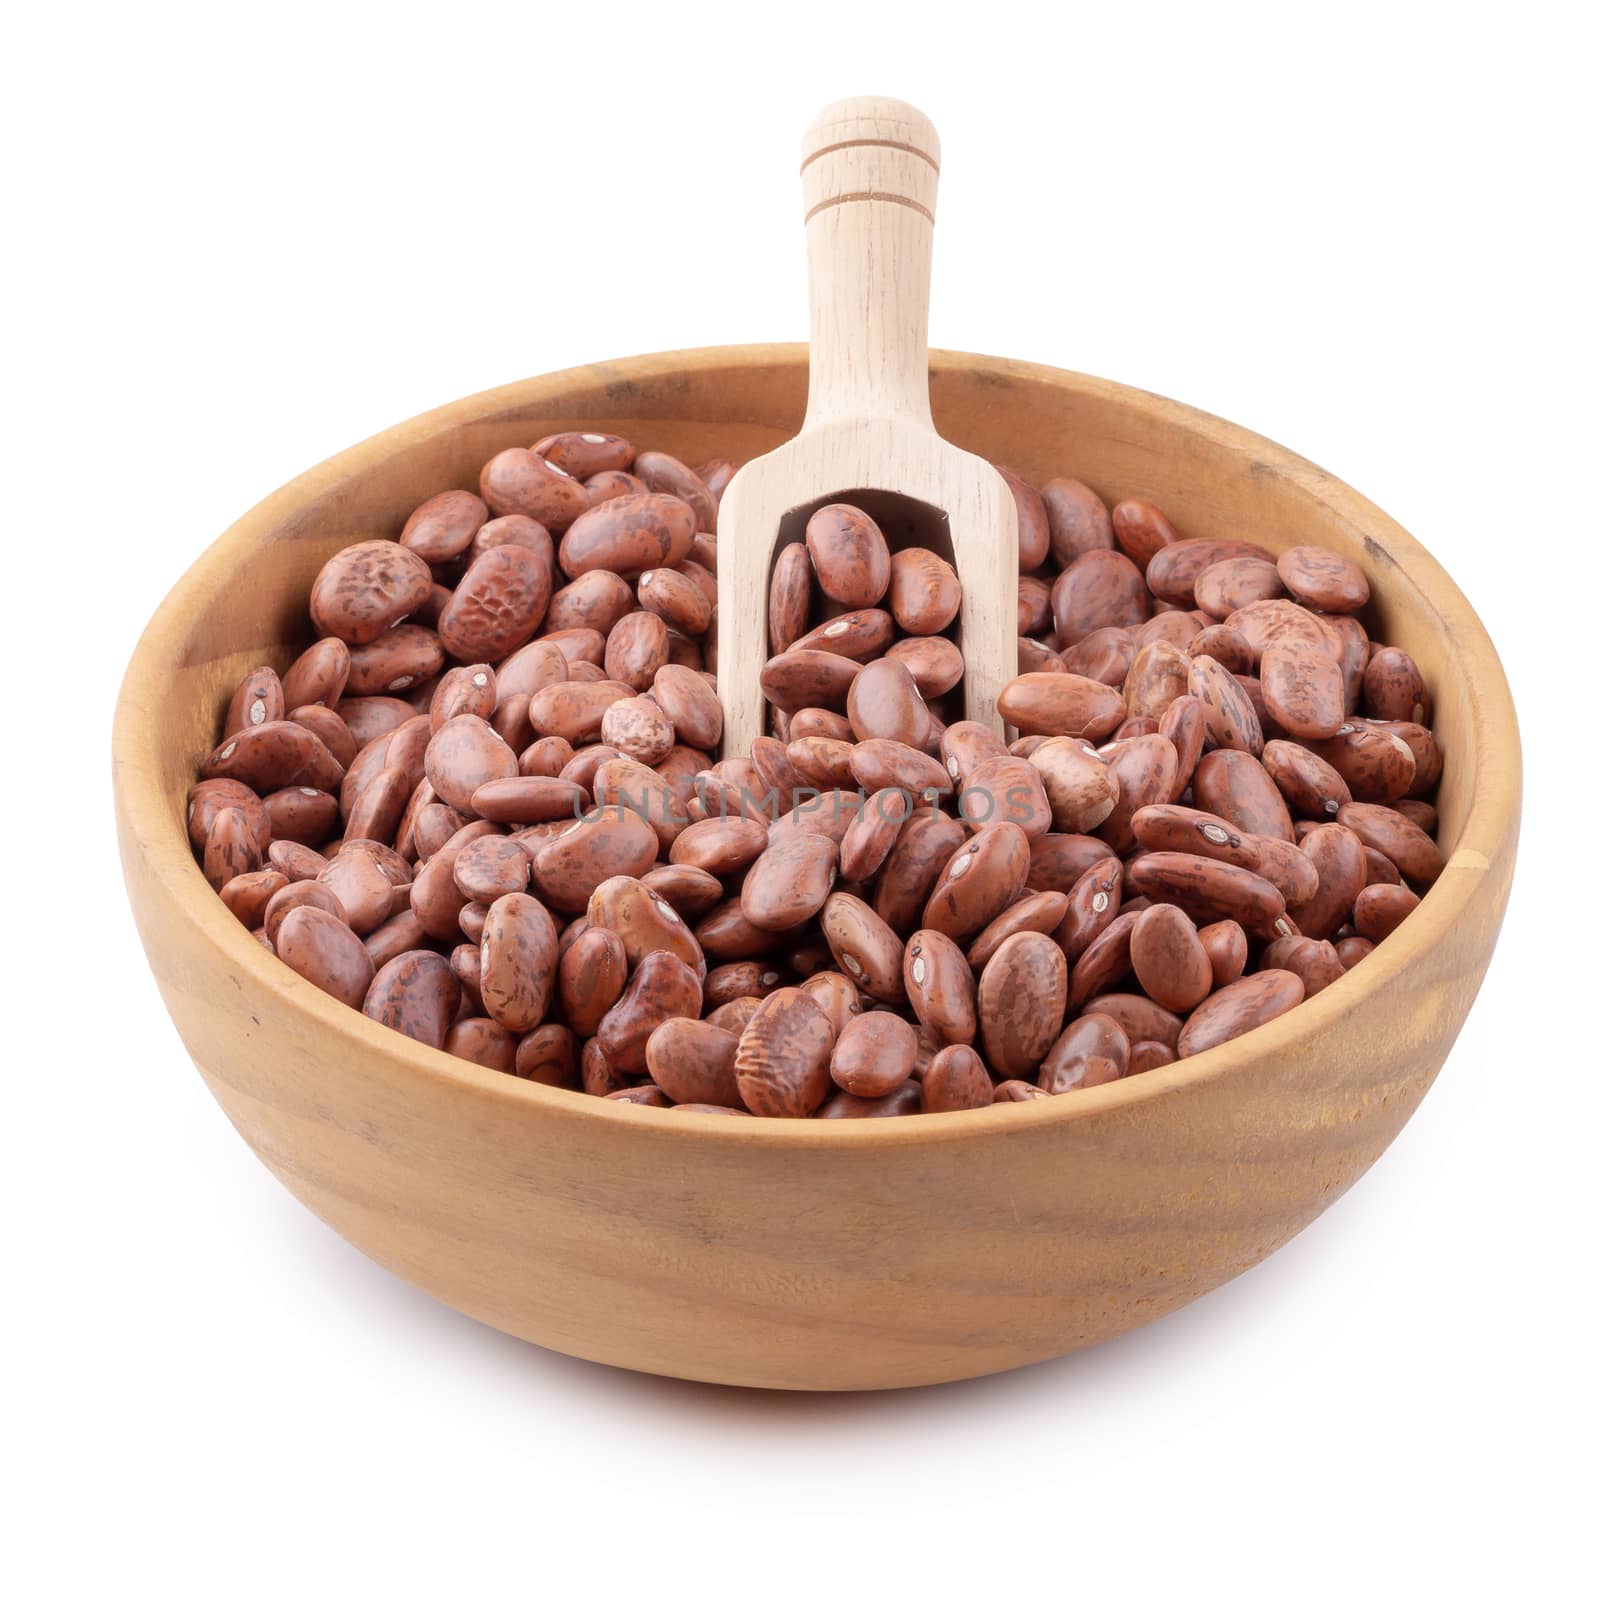 pinto beans in a wooden bowl isolated on a white background by kaiskynet